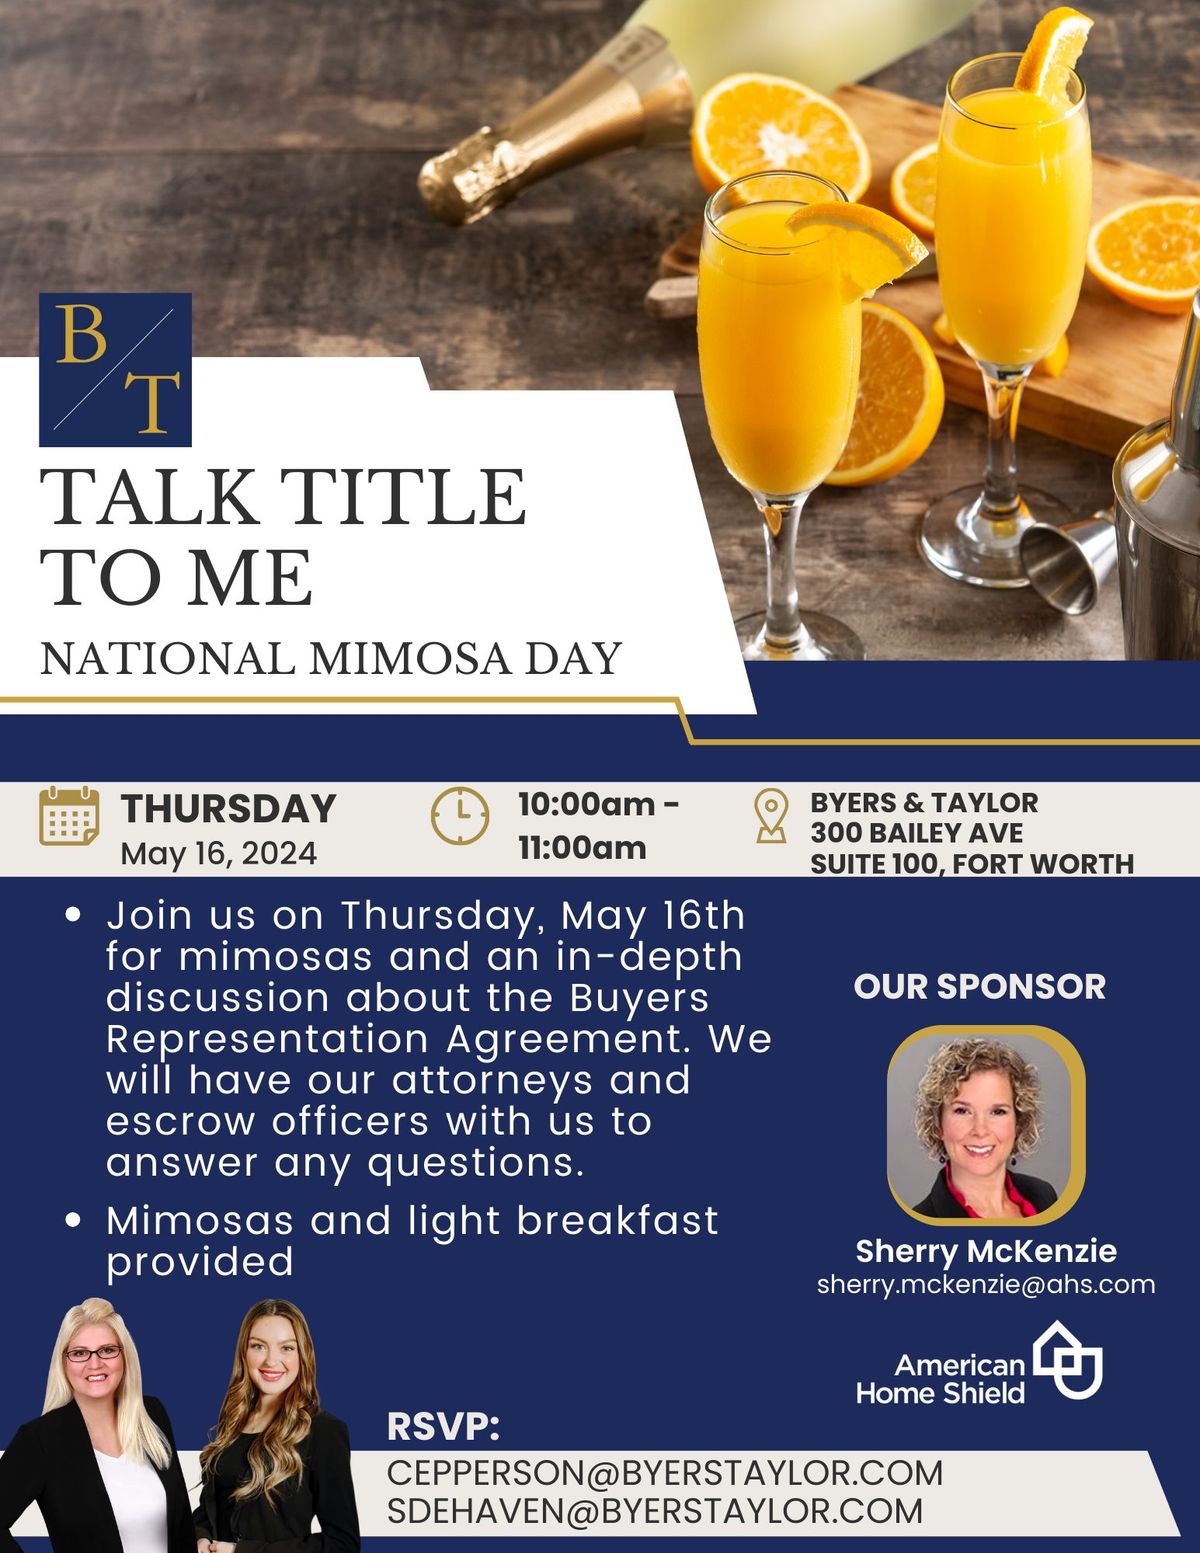 Talk Title To Me - National Mimosa Day!